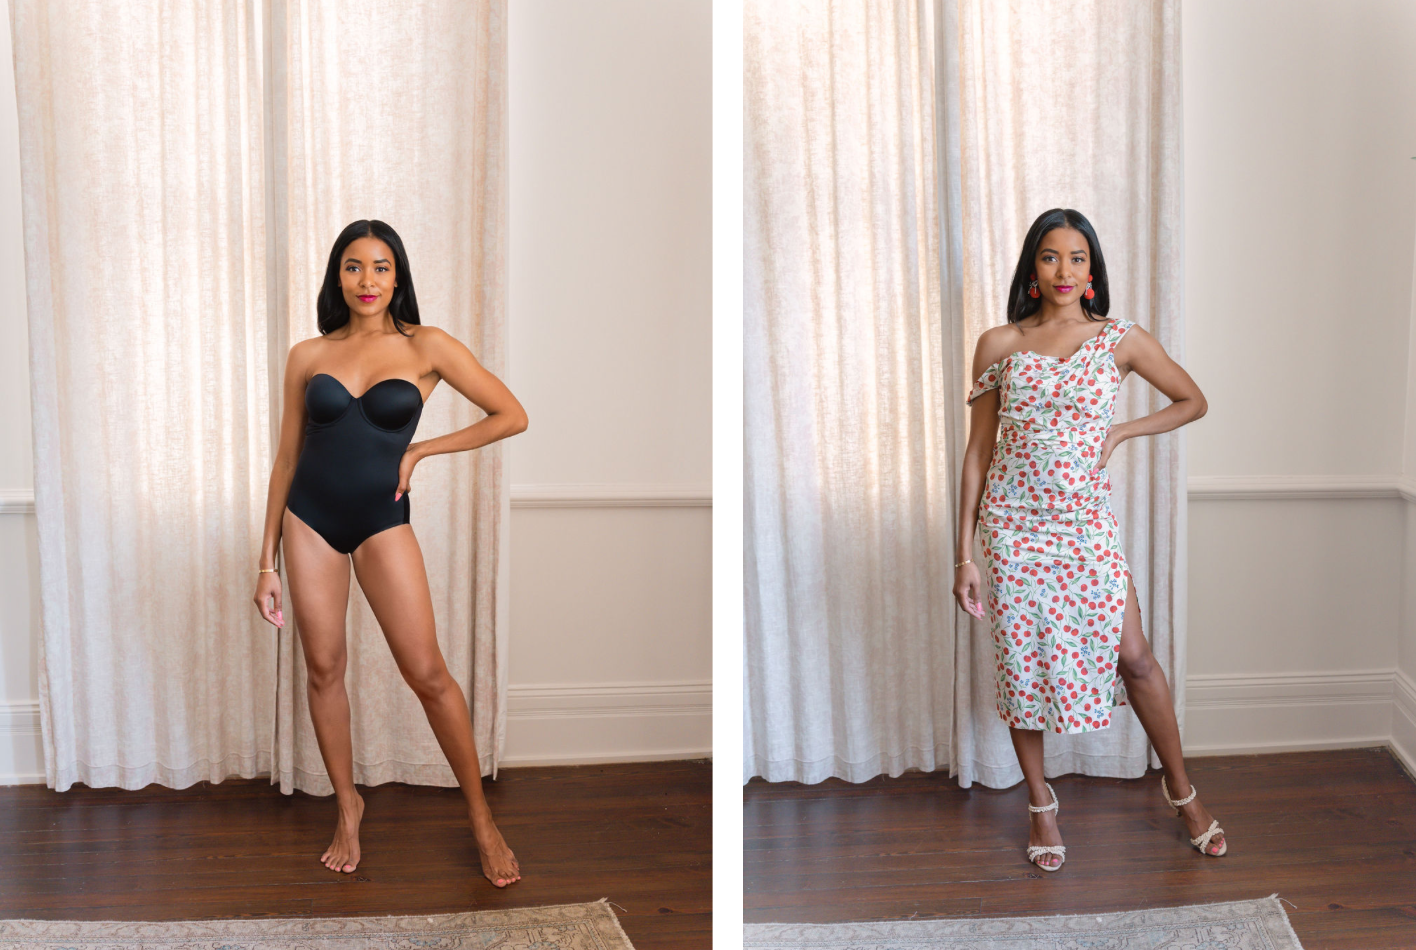 SPANX - Looking for a flawless finish? The Suit Your Fancy